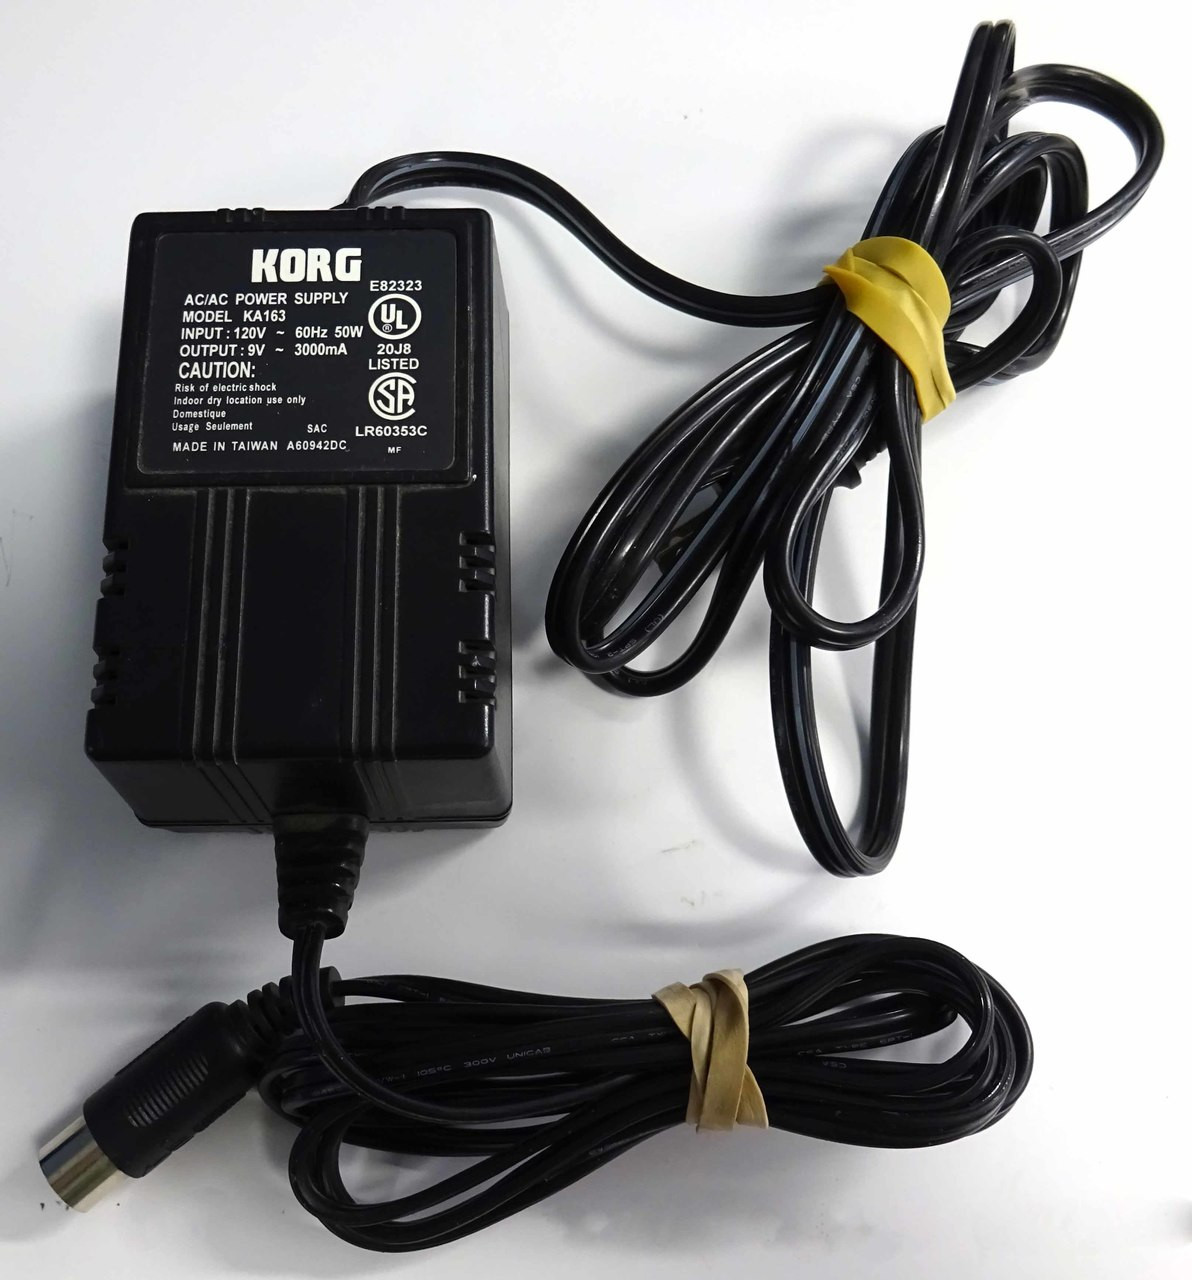 Korg Power Adapter for Korg Triton le, Karma and Others